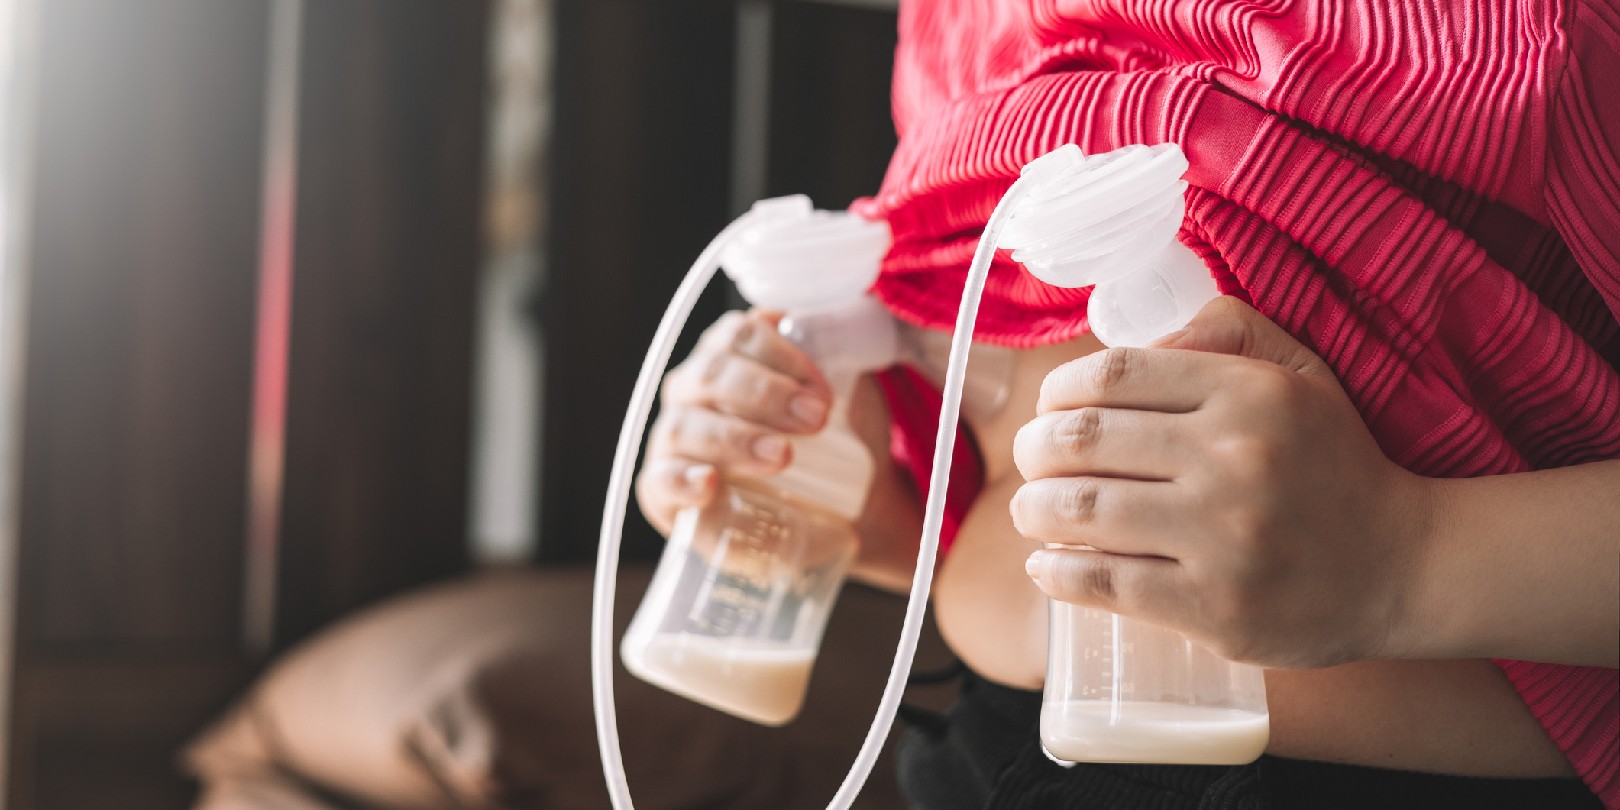 Mom using breast pump machine to pumping milk for her son in bedroom. Colostrum milk, Transitional milk, Breast Pumping milk concept.